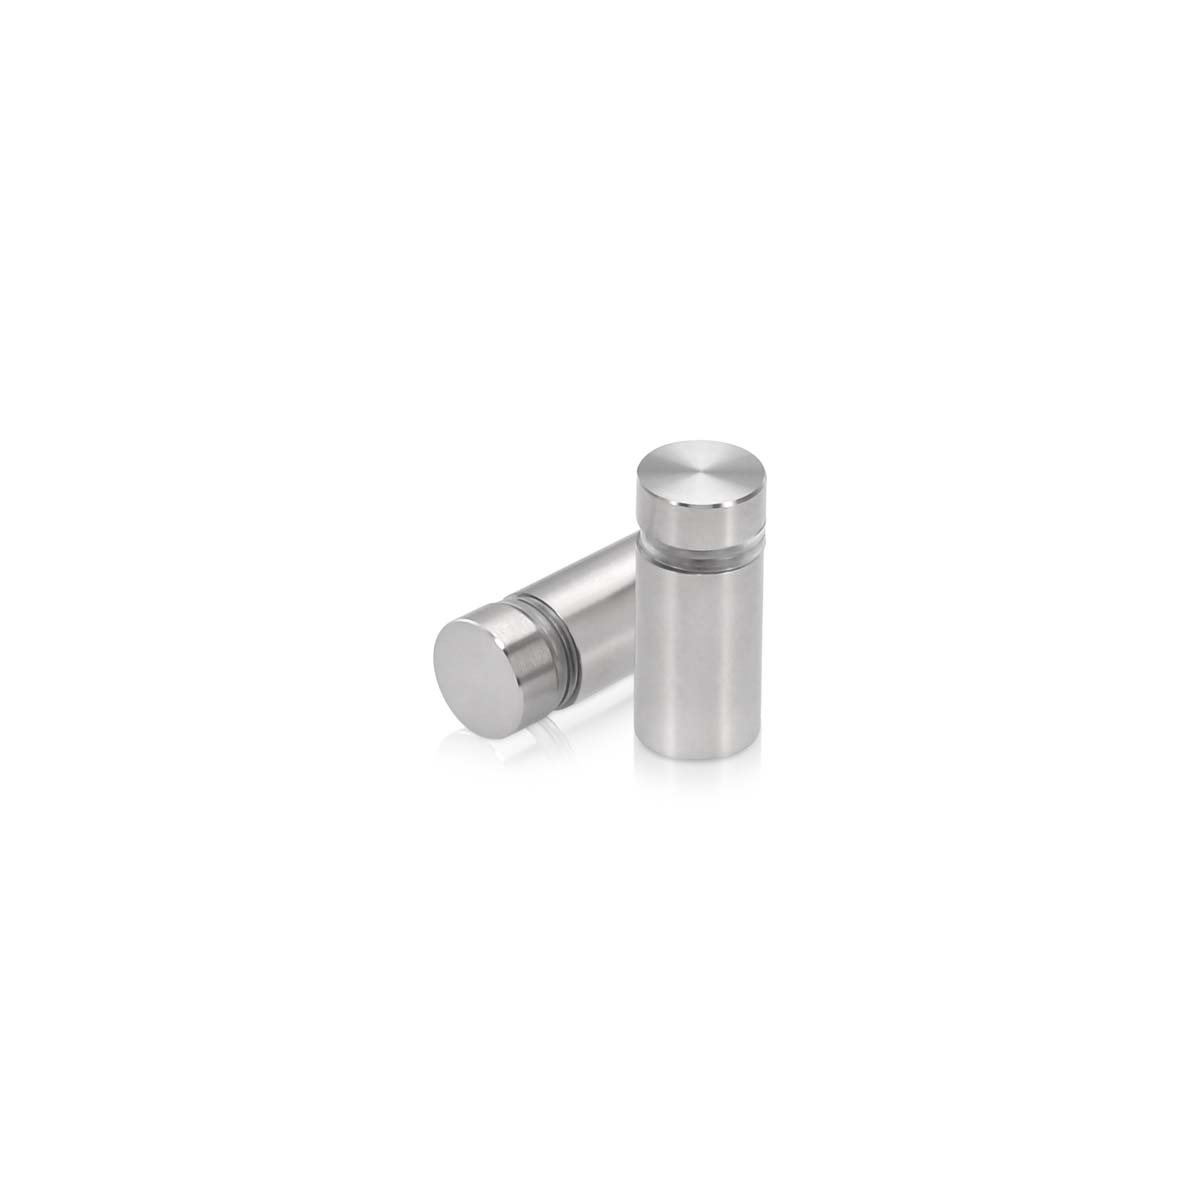 1/2'' Diameter X 3/4'' Barrel Length, Stainless Steel Brushed Finish. Easy Fasten Standoff (For Inside Use Only) [Required Material Hole Size: 3/8'']